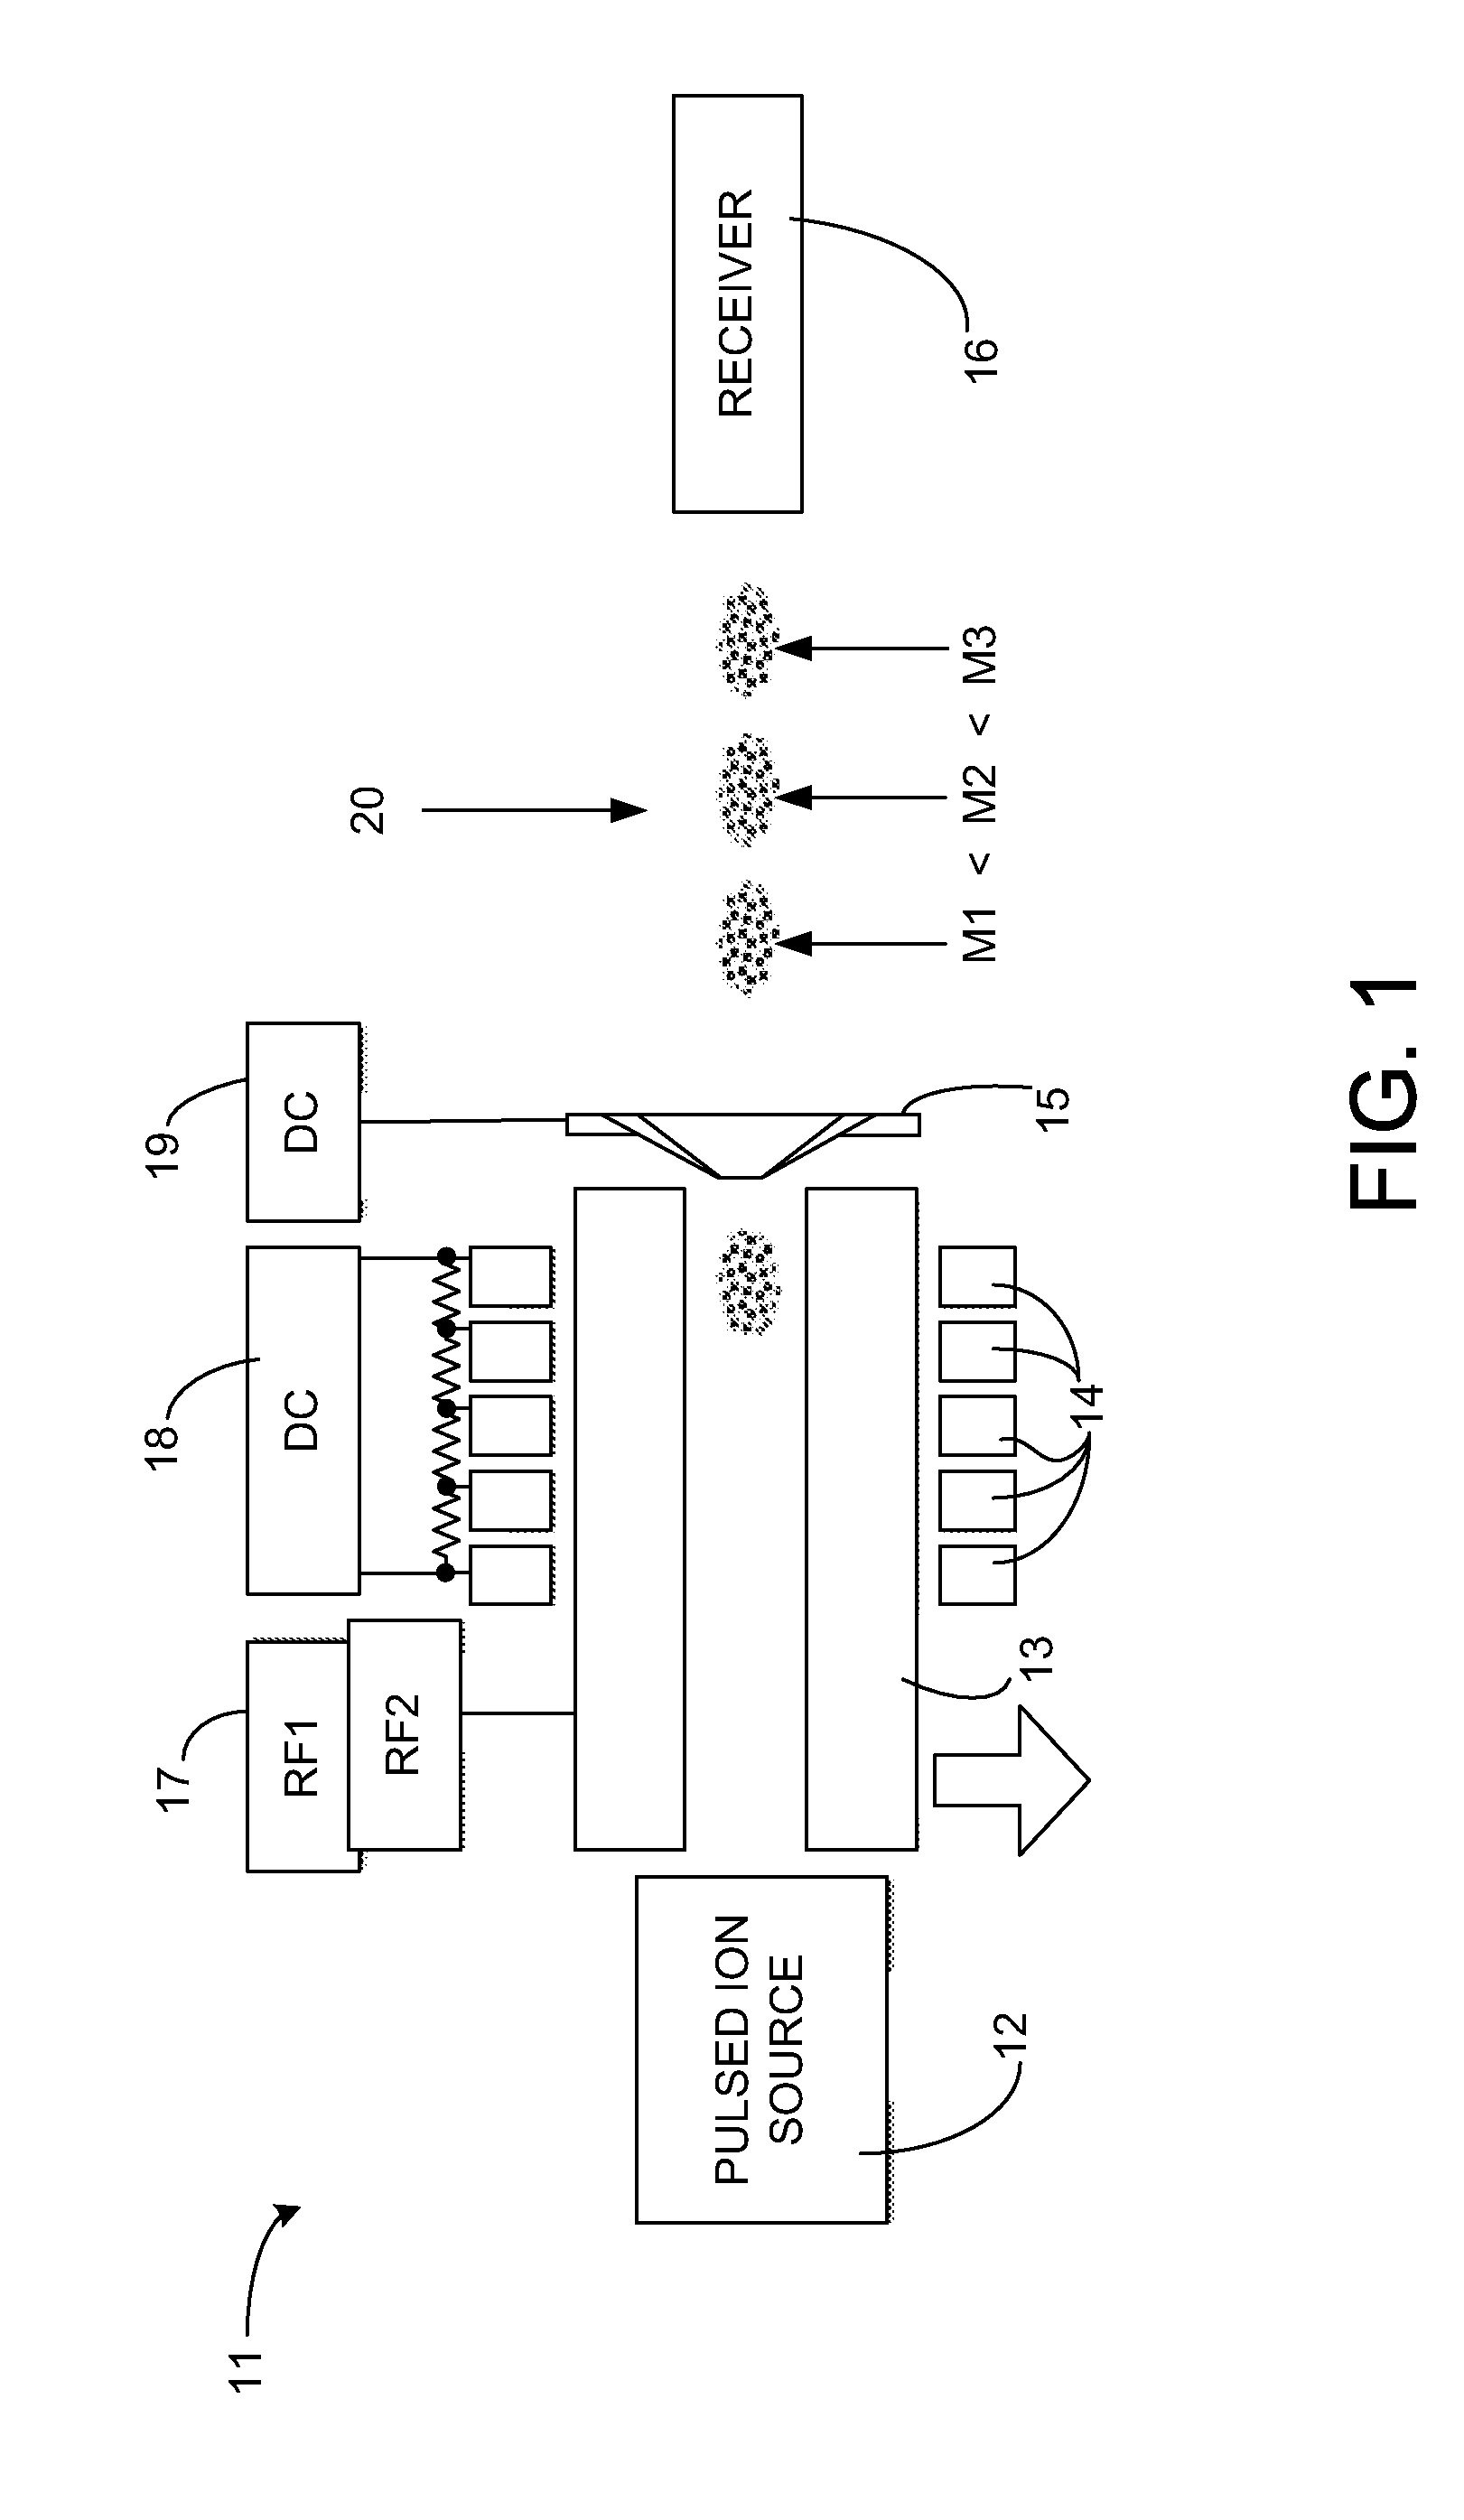 Linear ion trap with an imbalanced radio frequency field